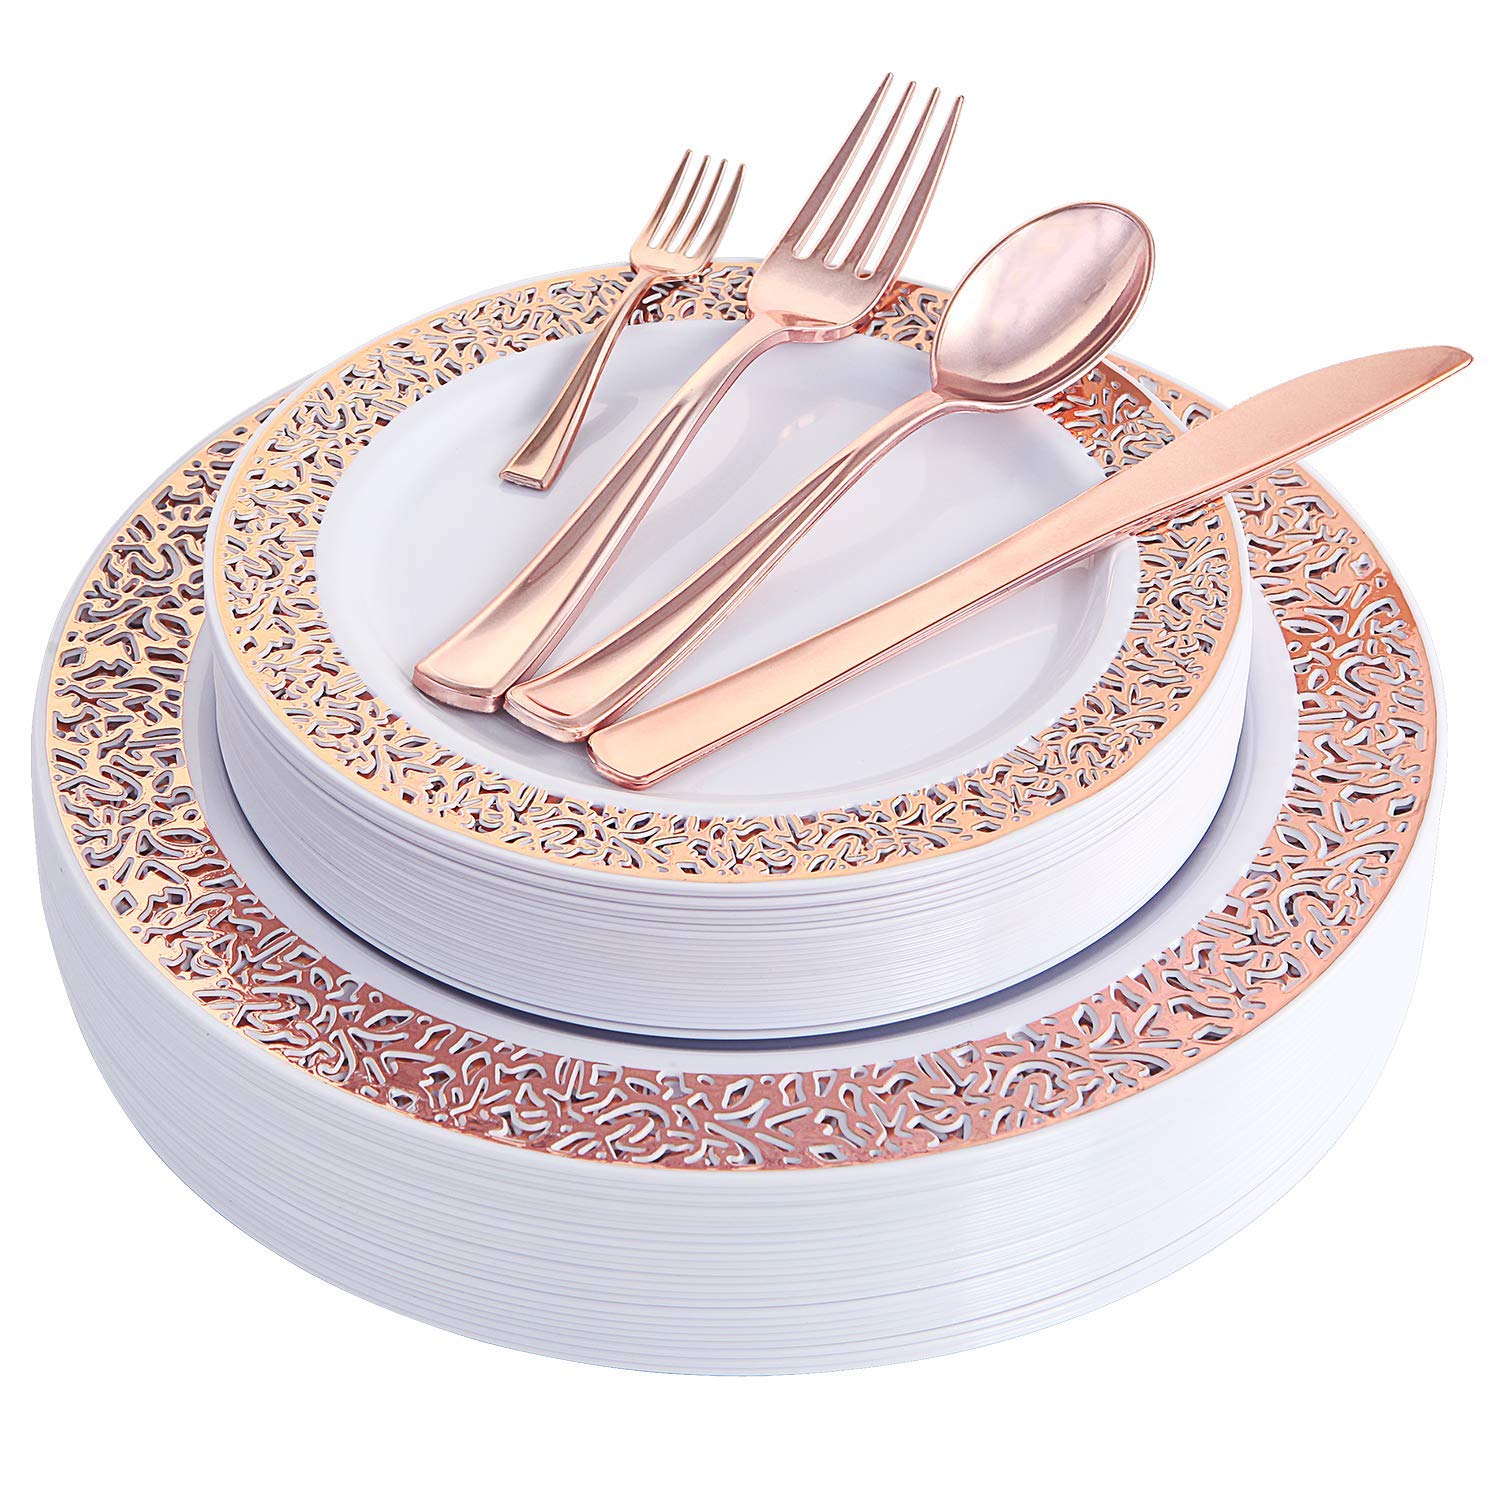 25 Dessert Plates 7.5 Includes: 25 Dinner Plates 10.25 WELLIFE 150 Pcs Rose Gold Plastic Plates with Disposable Rose Gold Silverware 25 Cups 9OZ and 25 Rose Gold Cutlery 